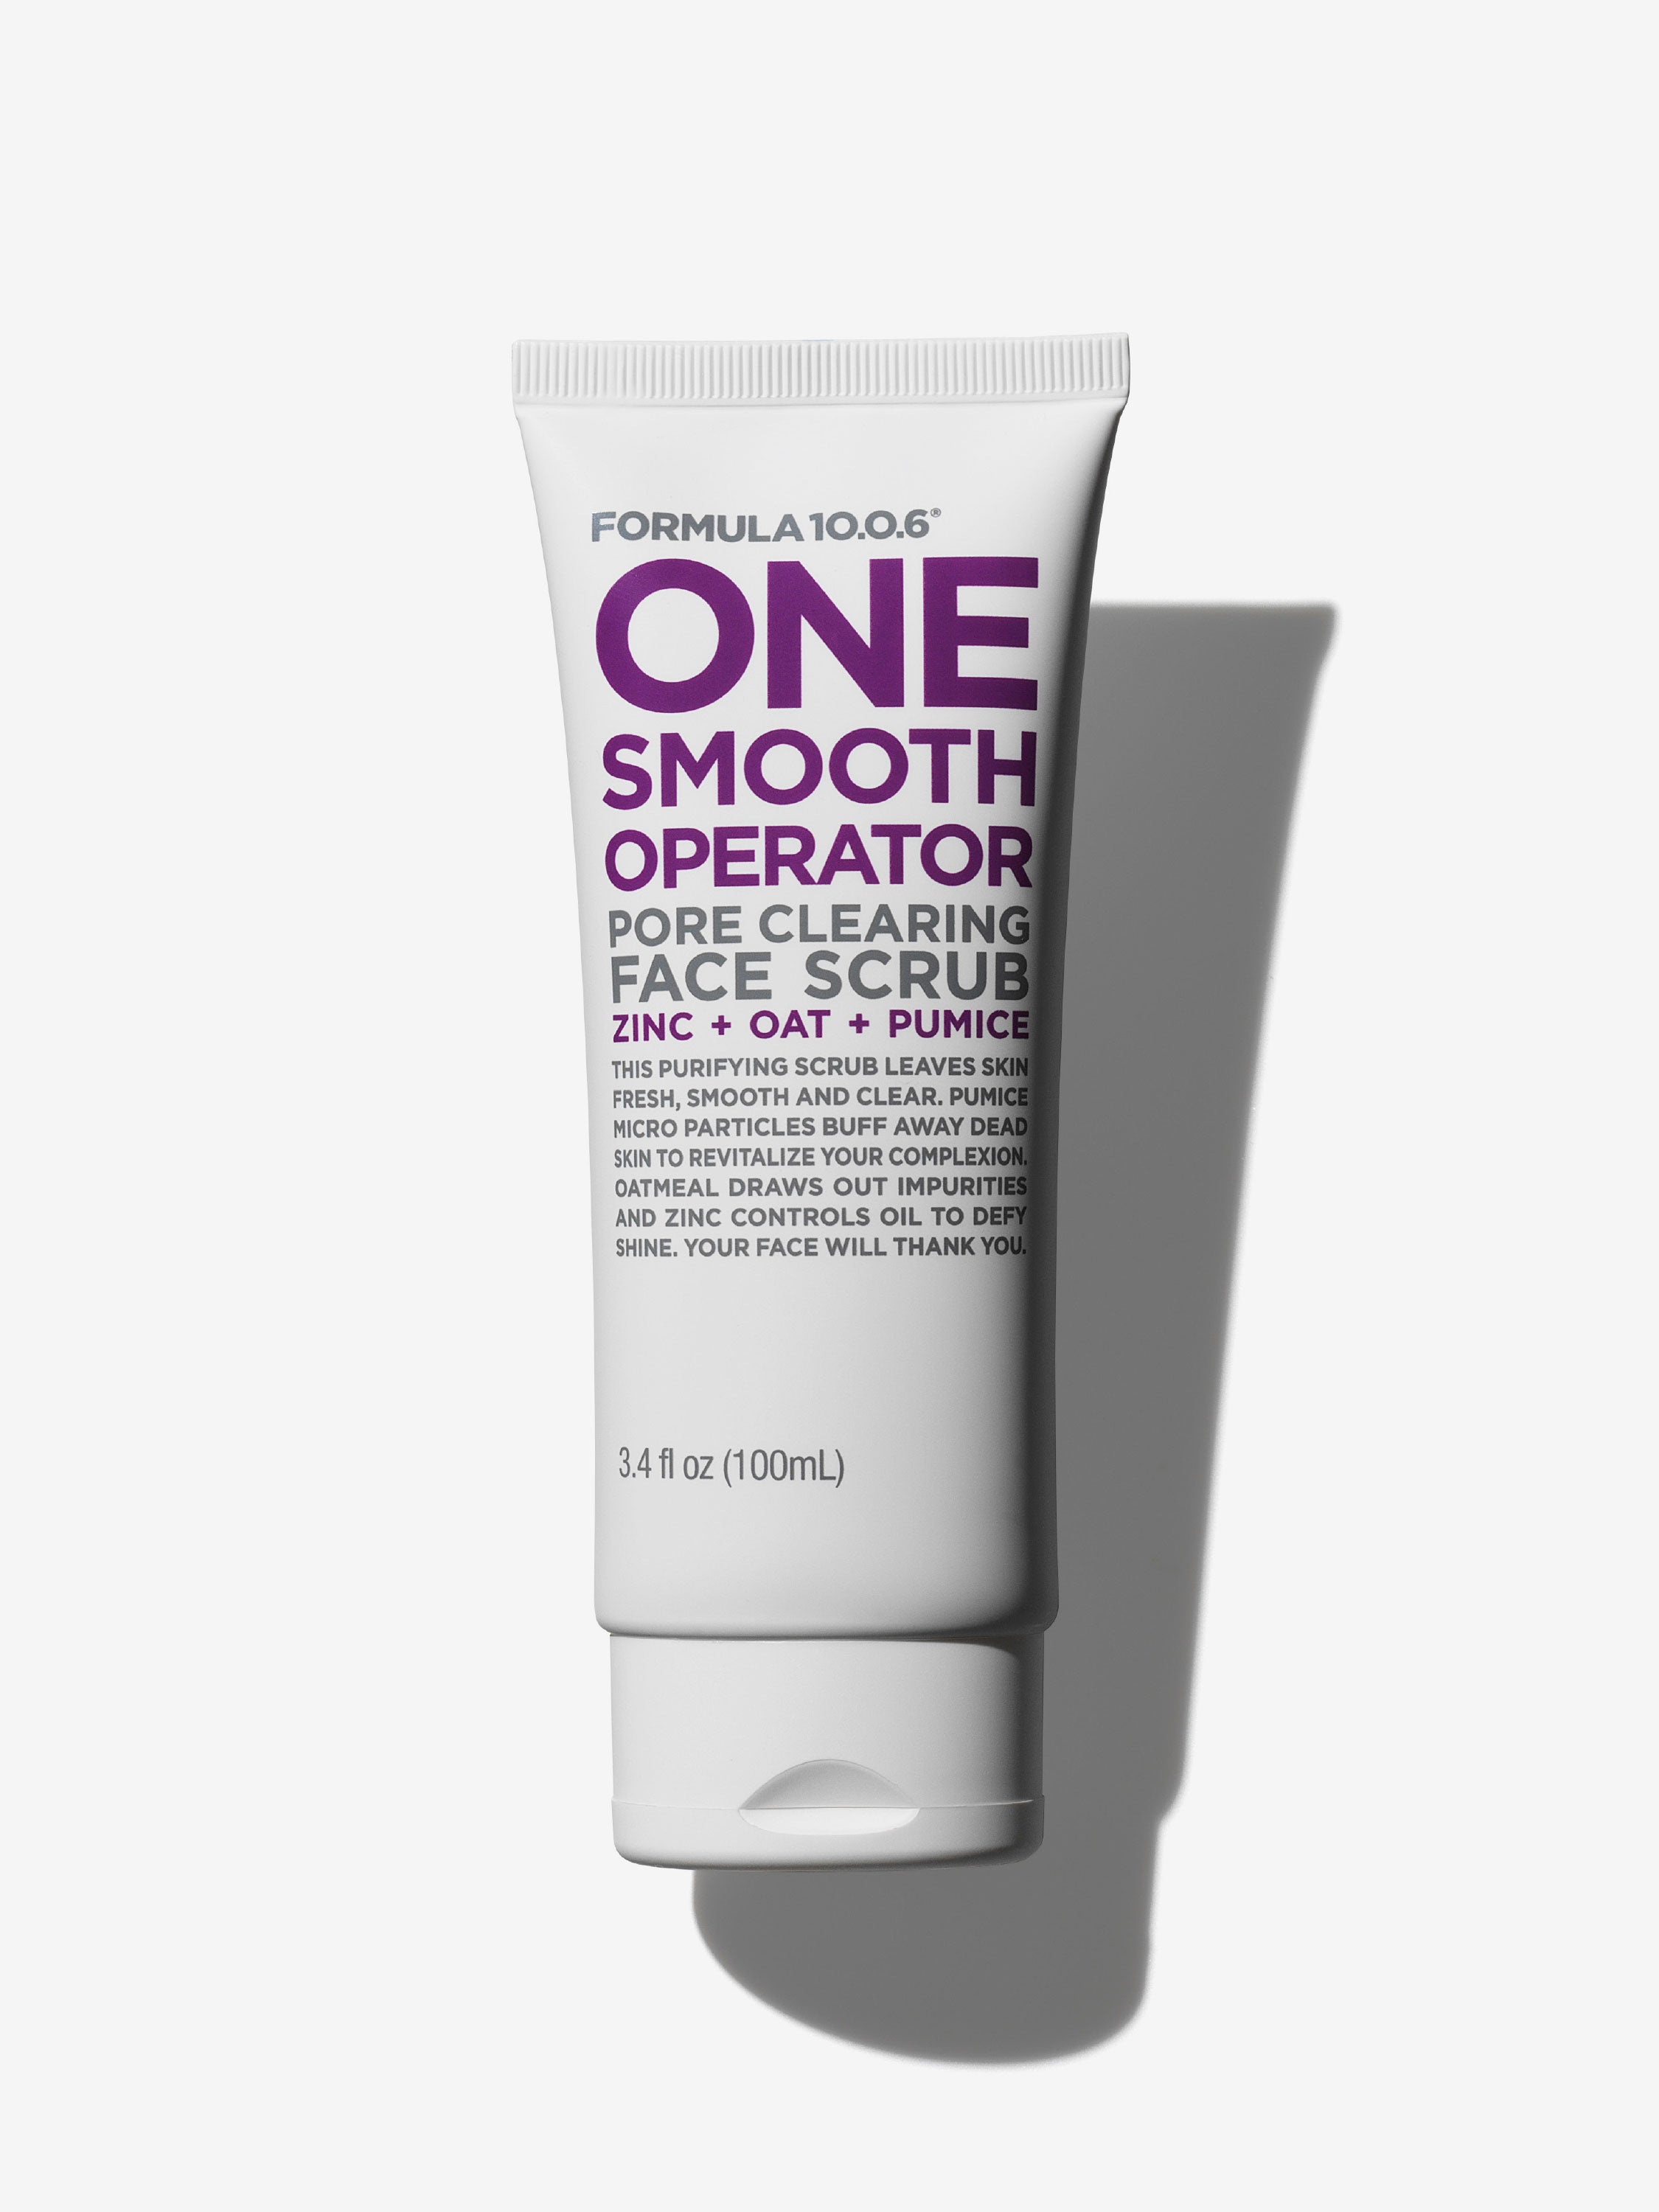 One Smooth Operator - Pore Clearing Face Scrub – Formula 10.0.6